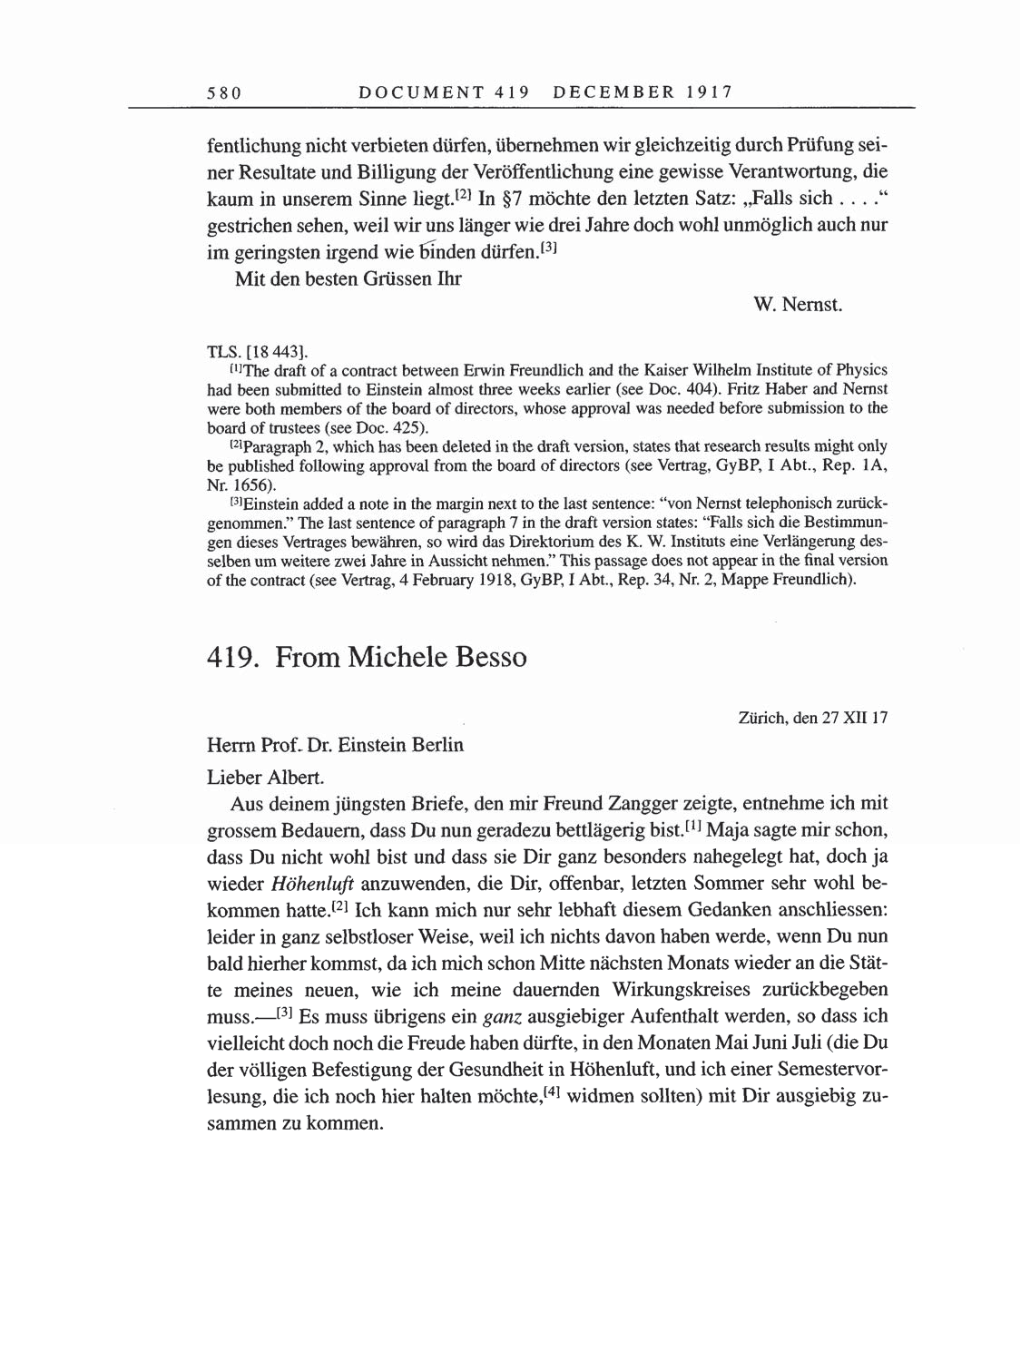 Volume 8, Part A: The Berlin Years: Correspondence 1914-1917 page 580